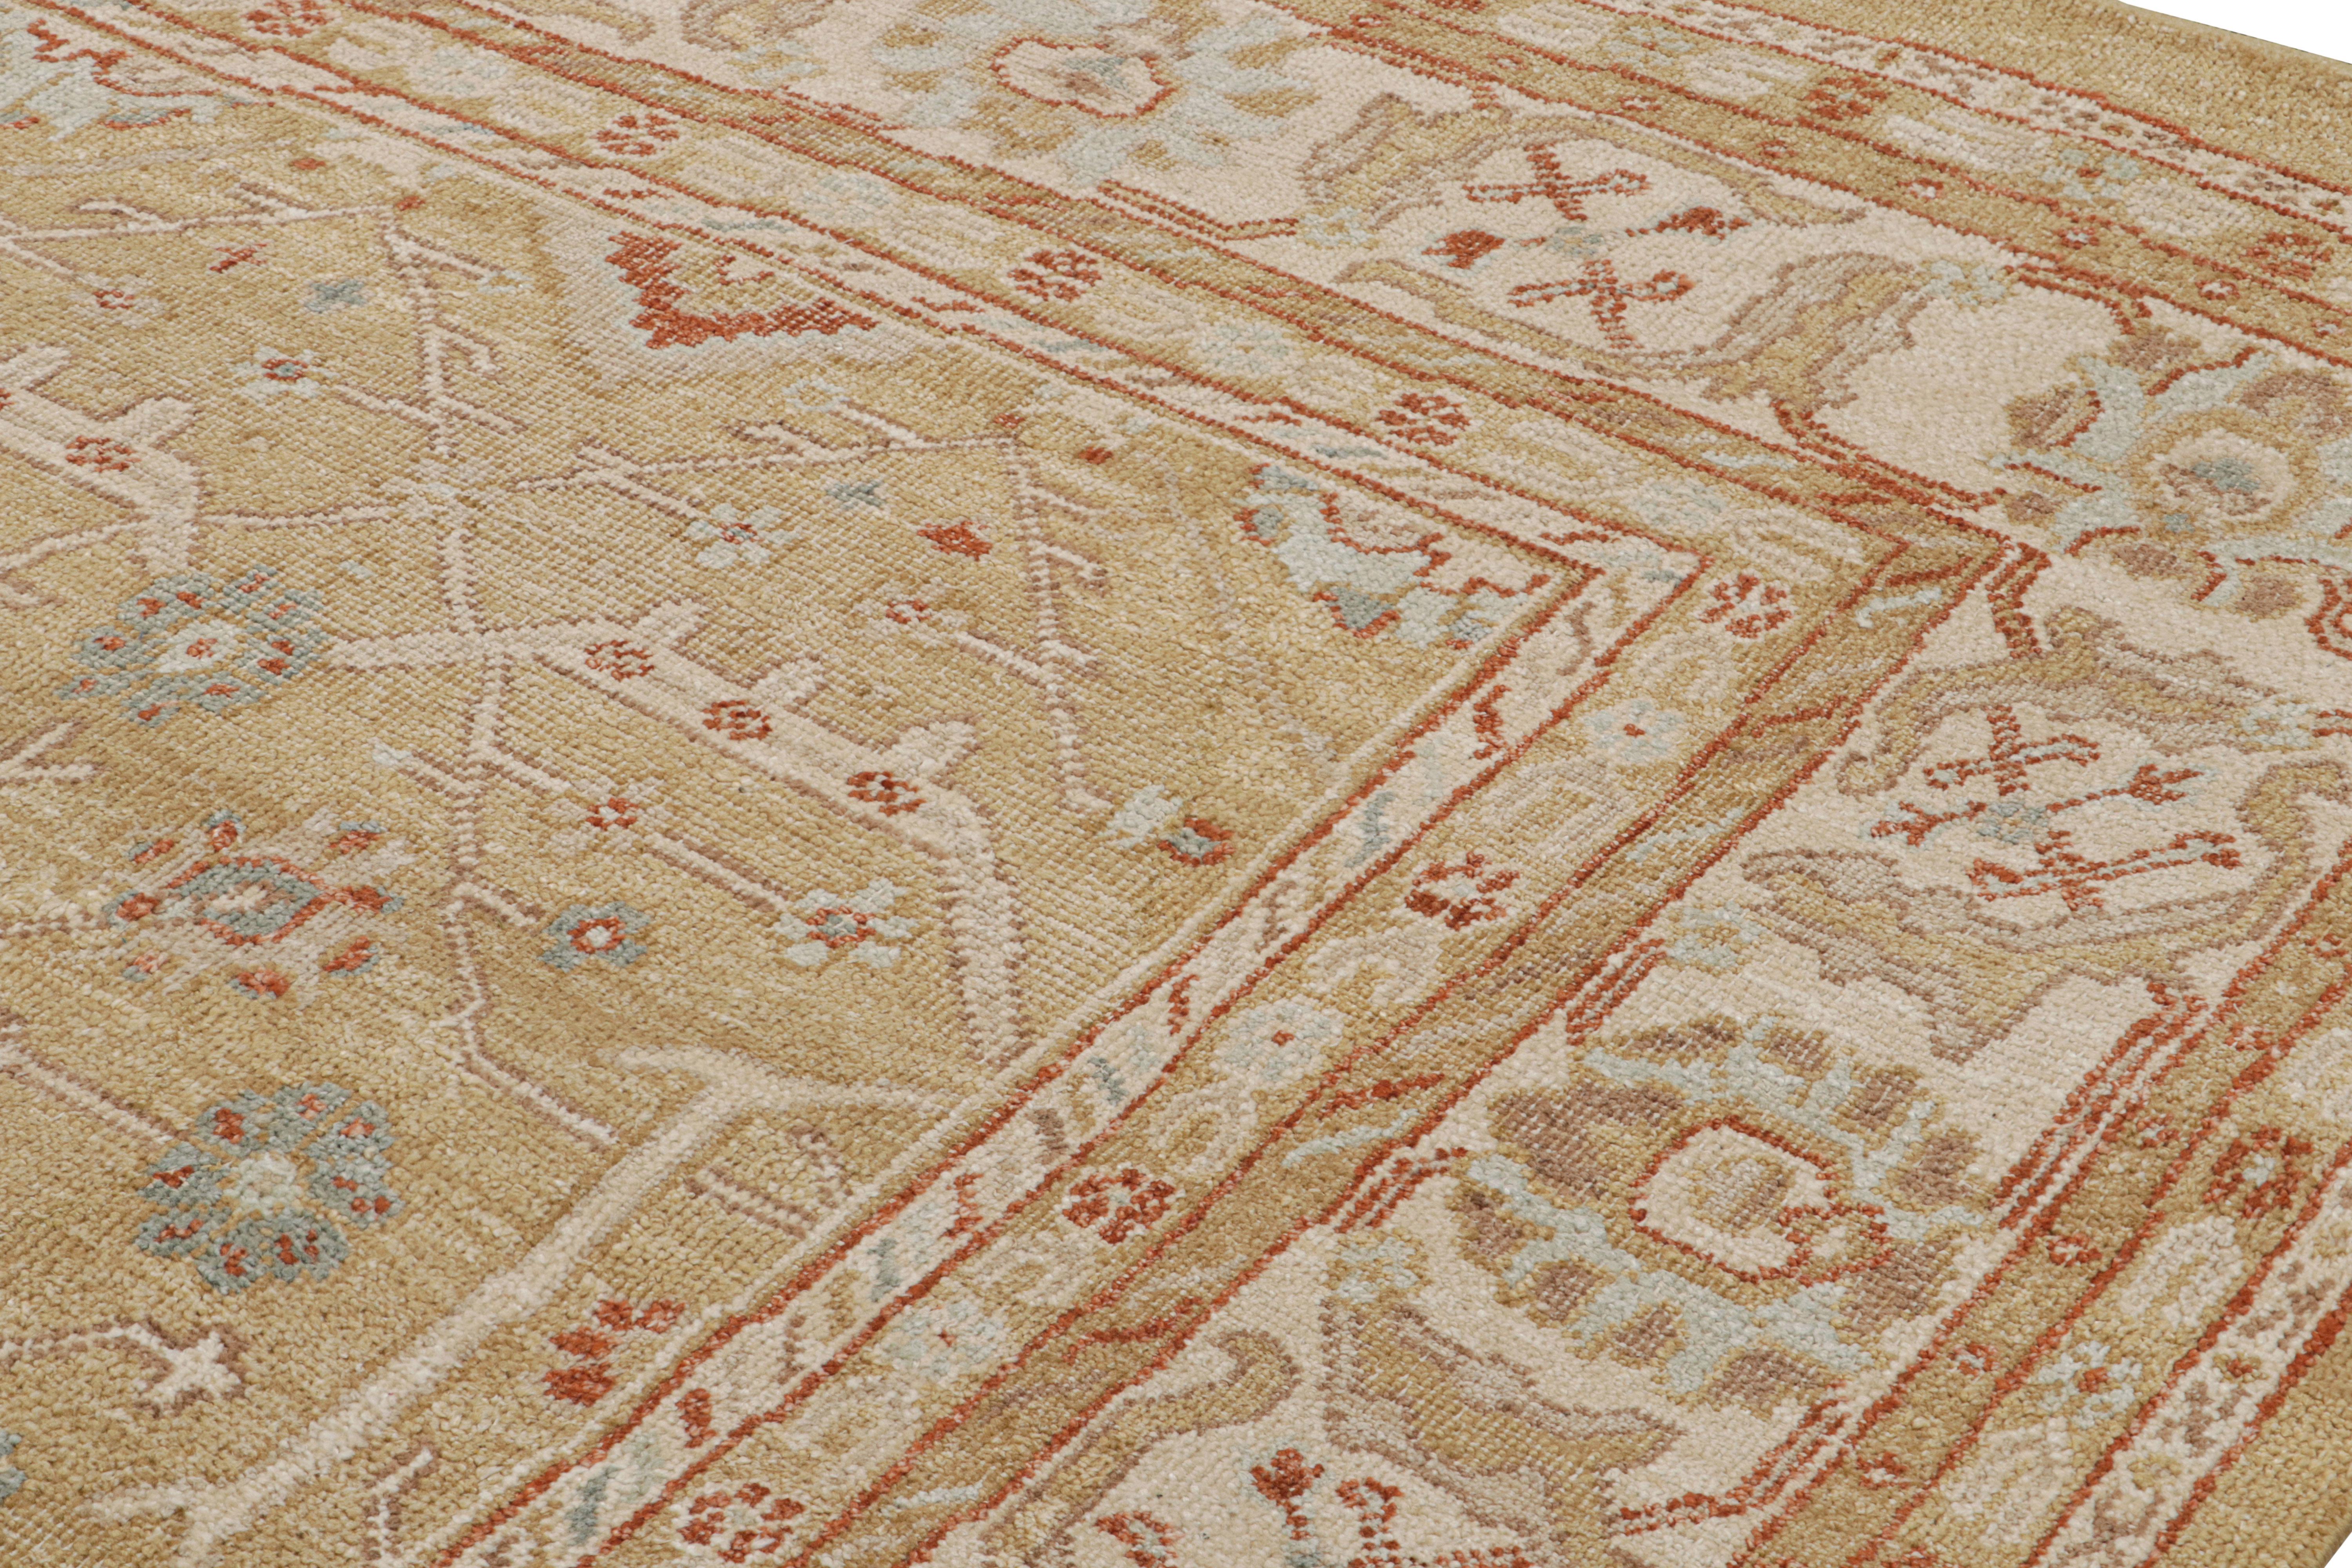 Rug & Kilim’s Oushak Style Rug in Beige-Brown, Gold Floral Patterns In New Condition For Sale In Long Island City, NY